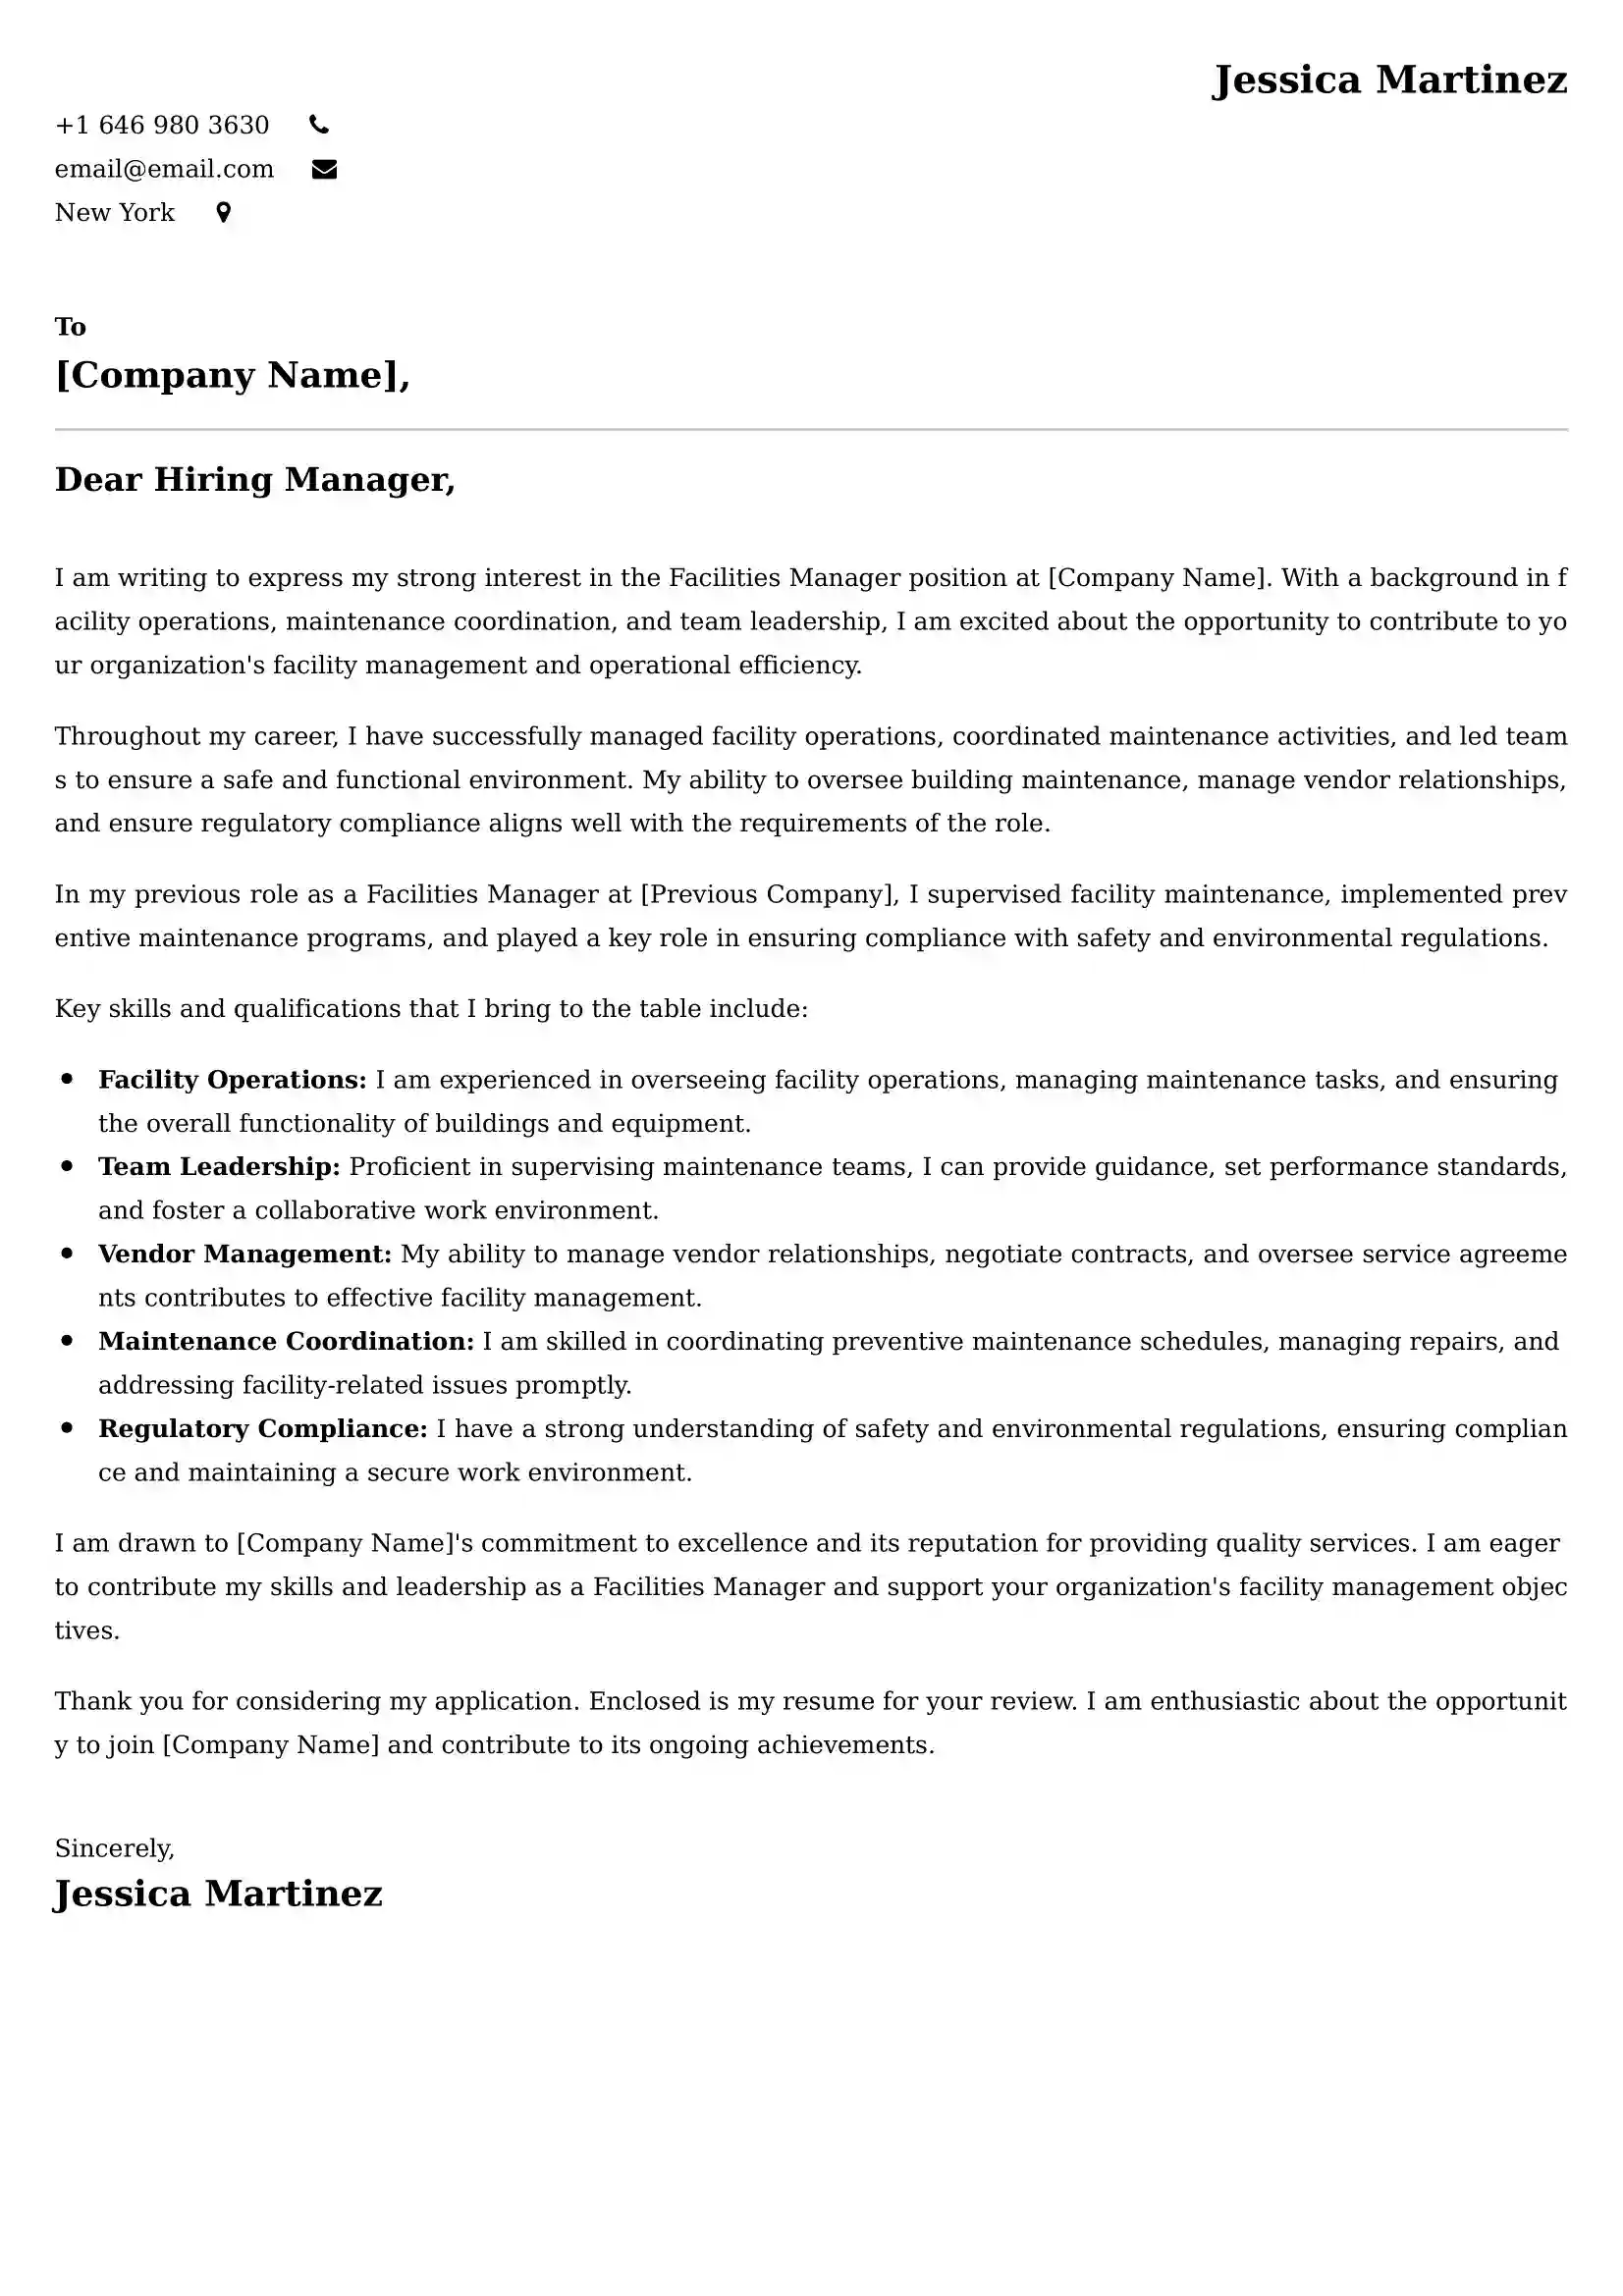 Facilities Manager Cover Letter Examples for UK 